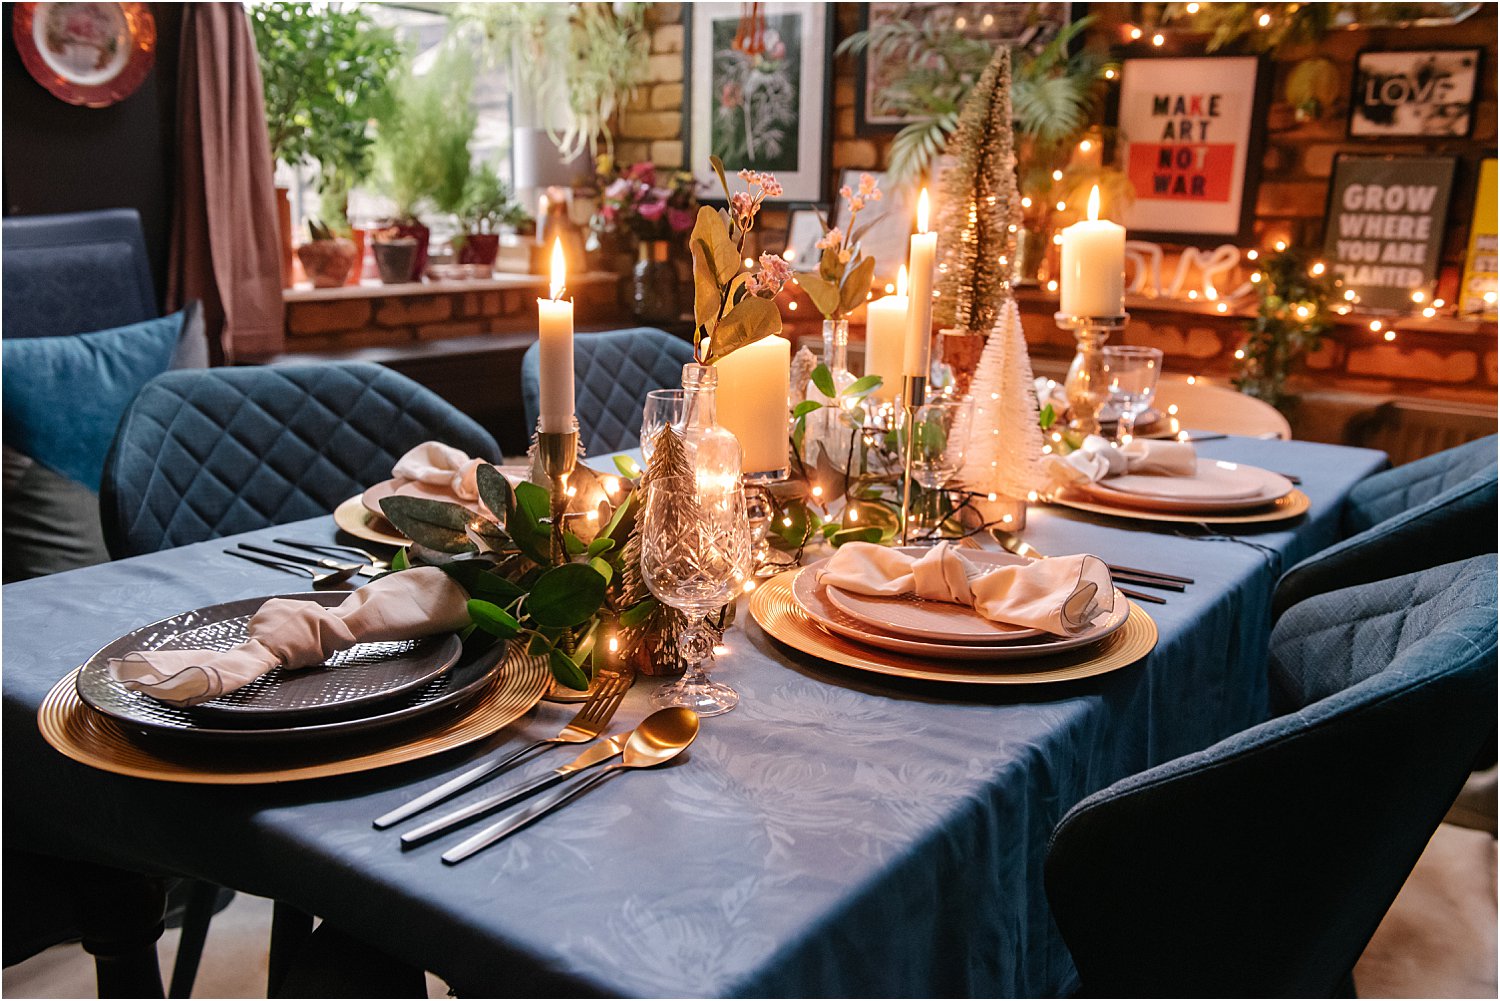 3-ways-style-Christmas-table-decorations-lily-sawyer-photo